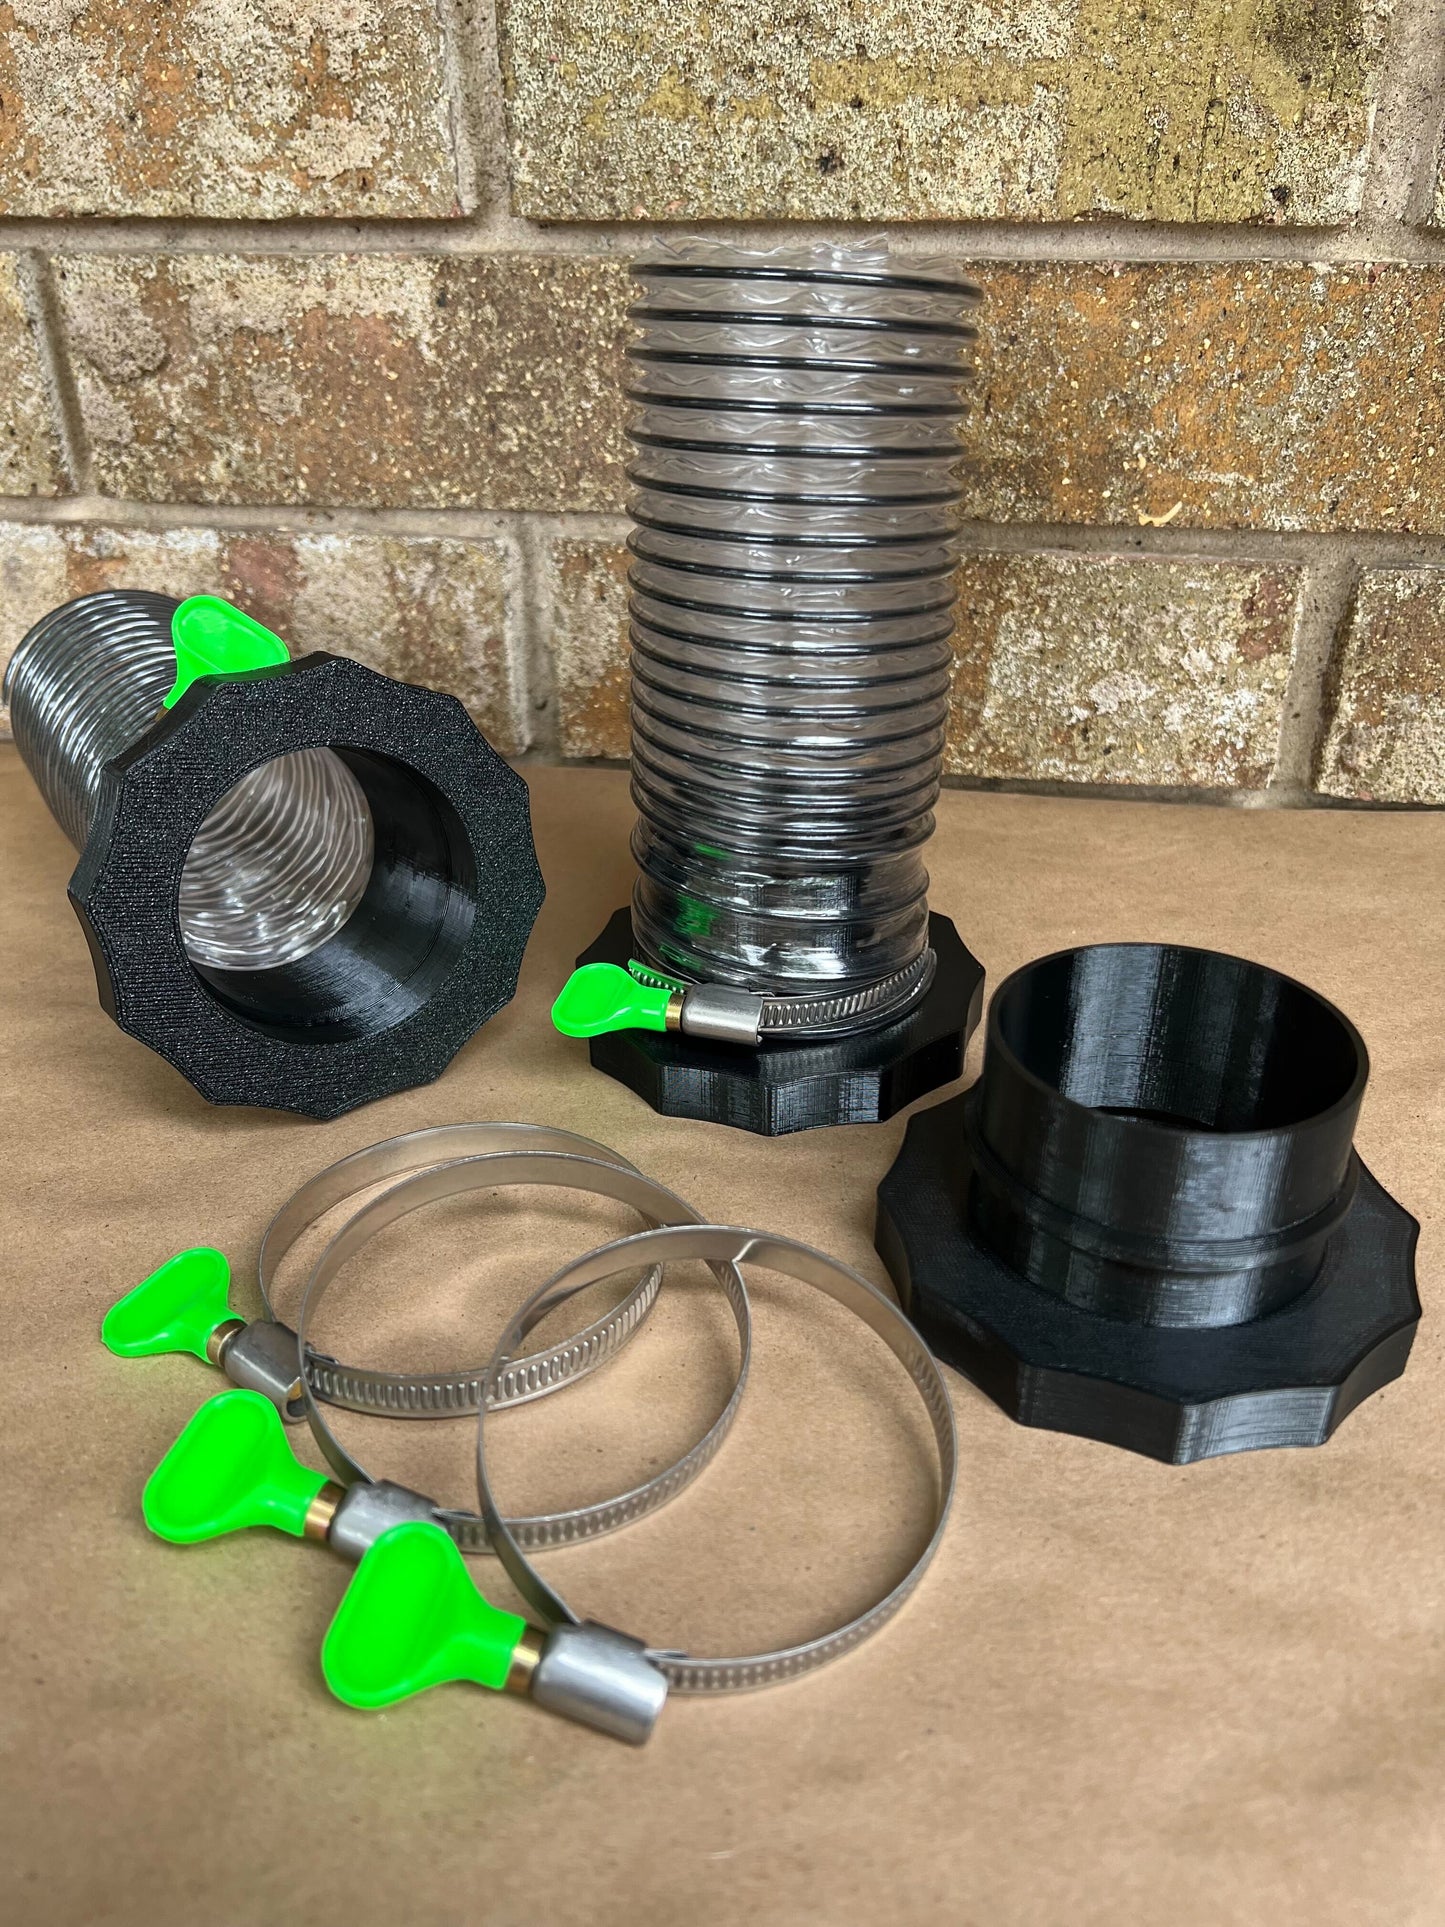 2.5" Port Magnetic Dust Collector System 10PC Starter Kit - Quick Disconnect